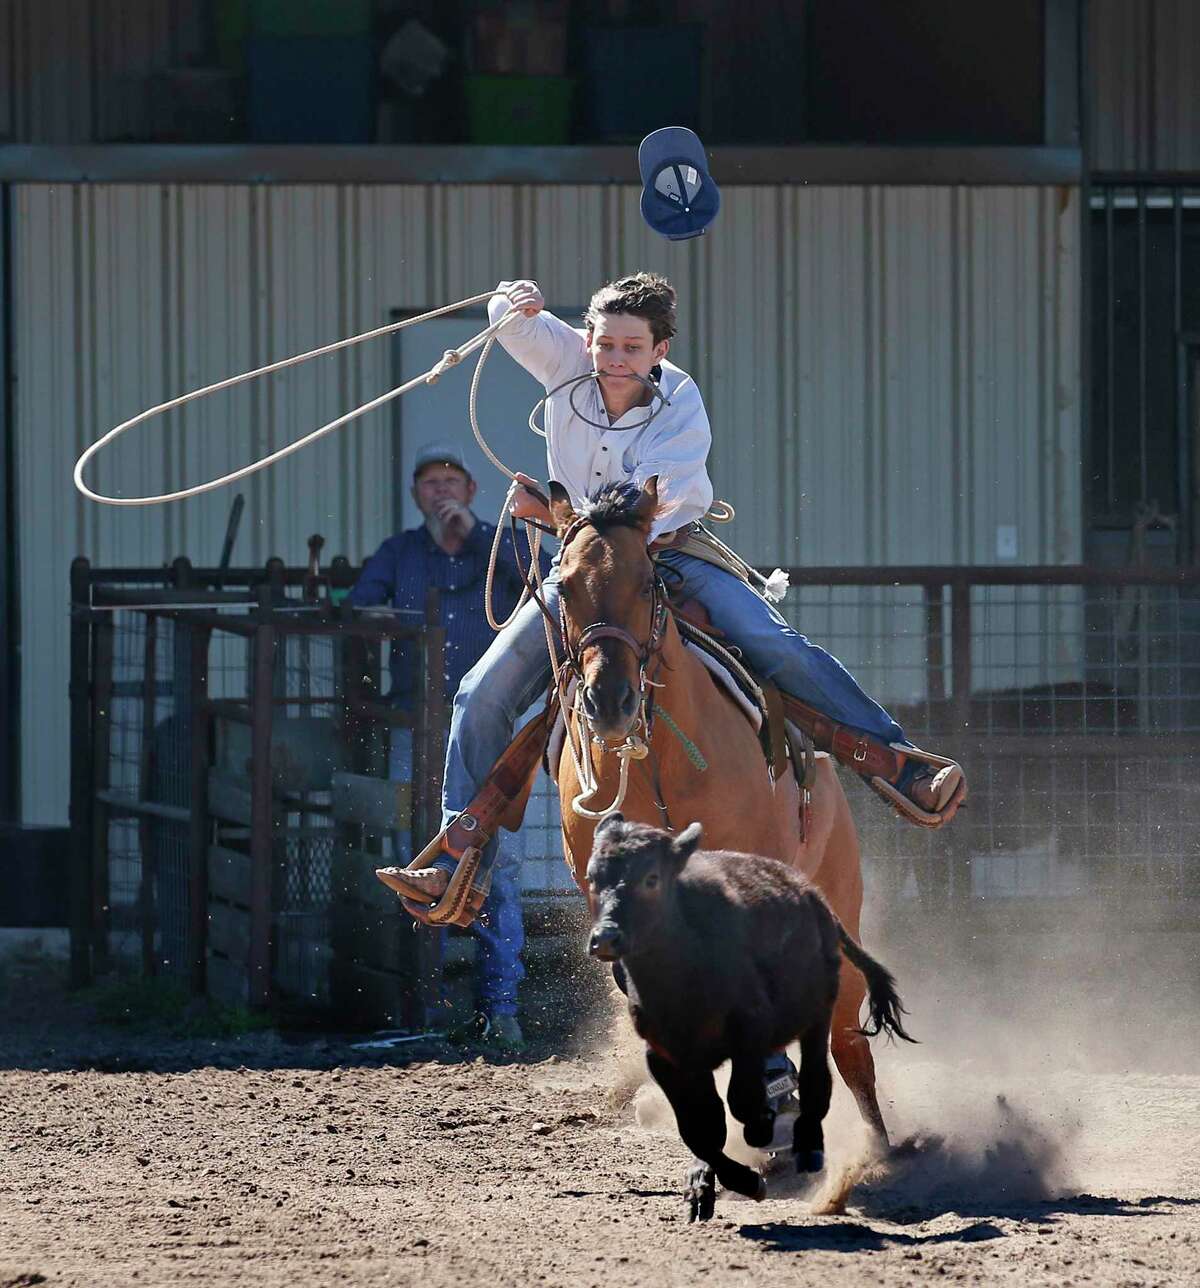 Doug Chandler takes off to begin his practice on the calf roping on Monday, Feb. 14, 2022 at his ranch near Cuero.